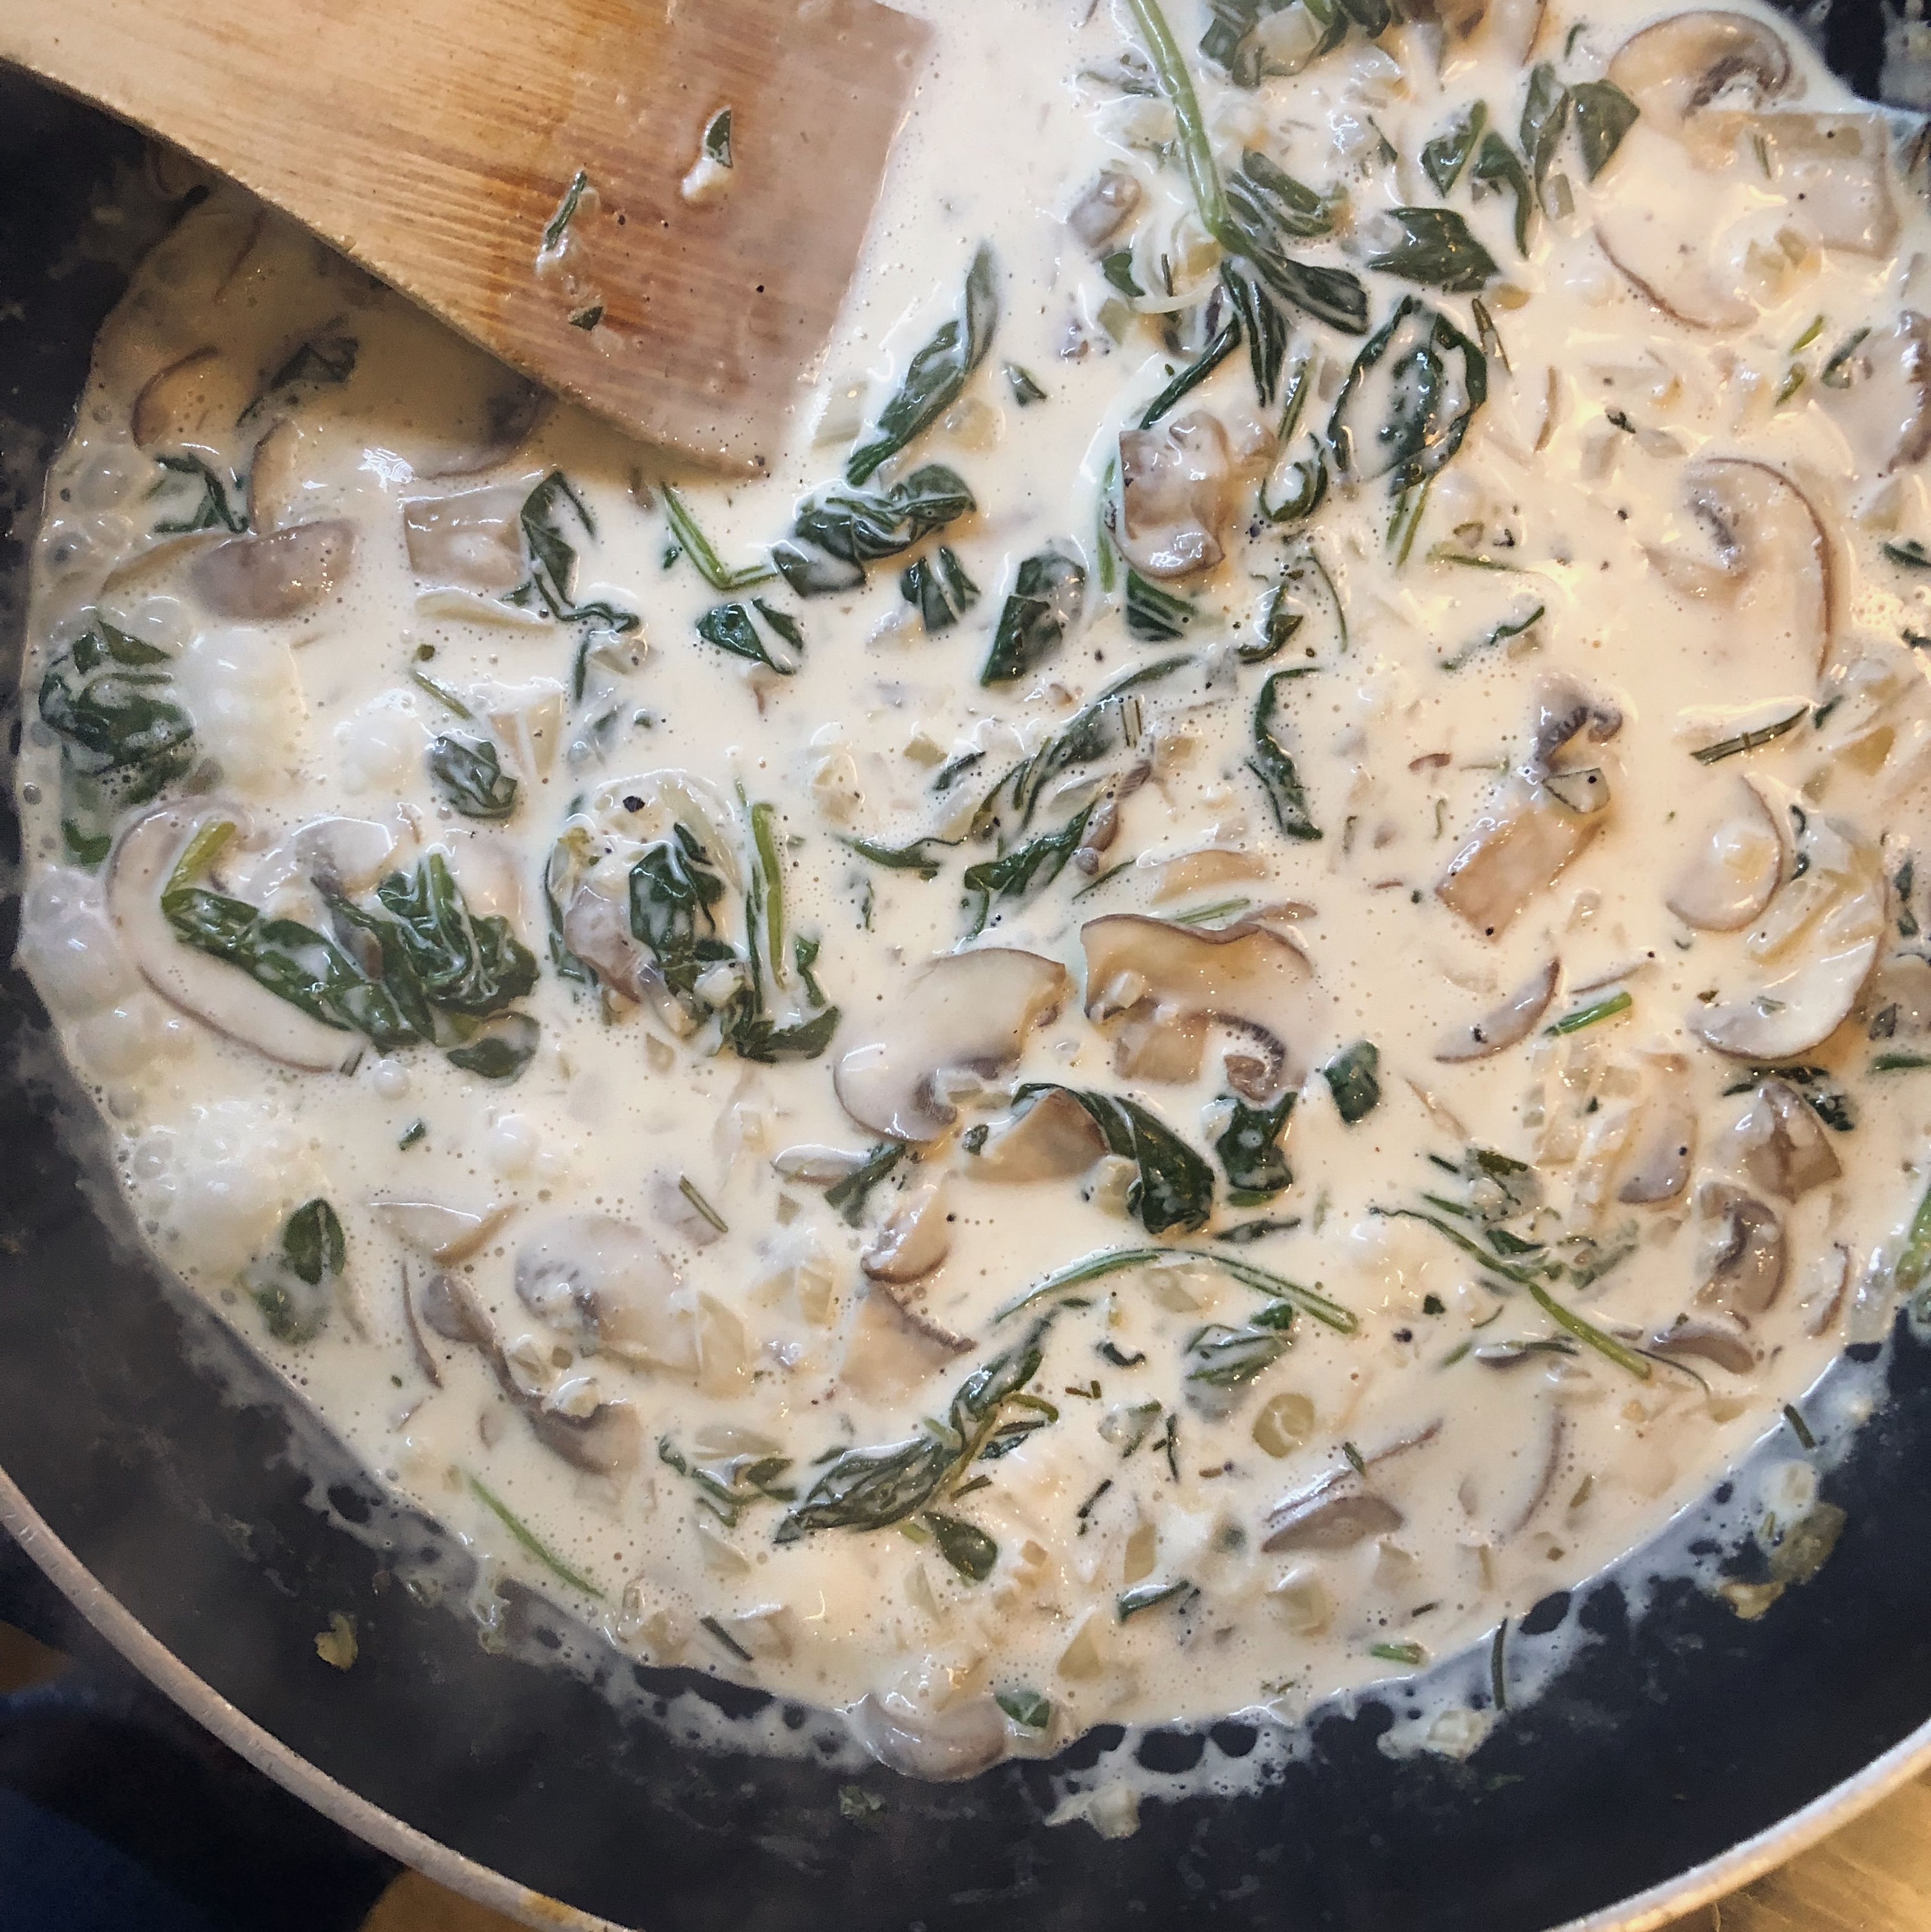 Turn heat up and add white wine and simmer for 5 minutes. Then add cream, soy sauce, lemon juice and dried oregano. Simmer on a low heat for 15 minutes, stirring occasionally.